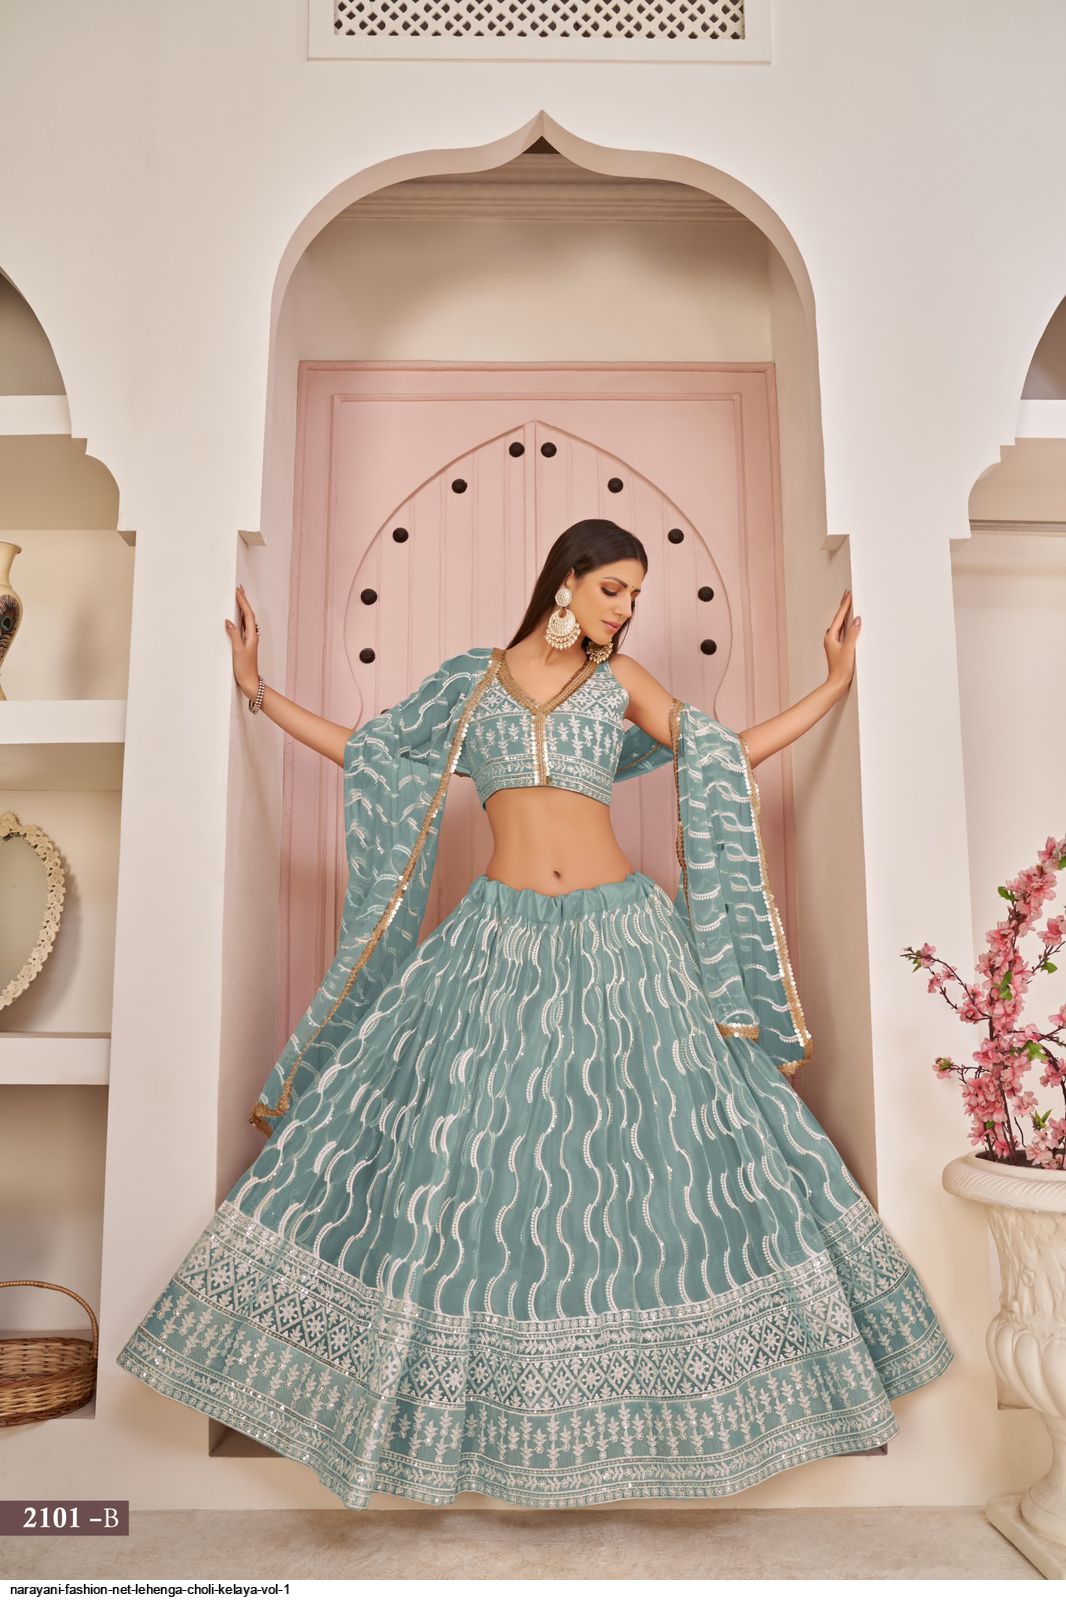 Malaika Arora Is All The Light Our Lives Need In A Brightly Coloured  Embellished Gopi Vaid Lehenga Choli